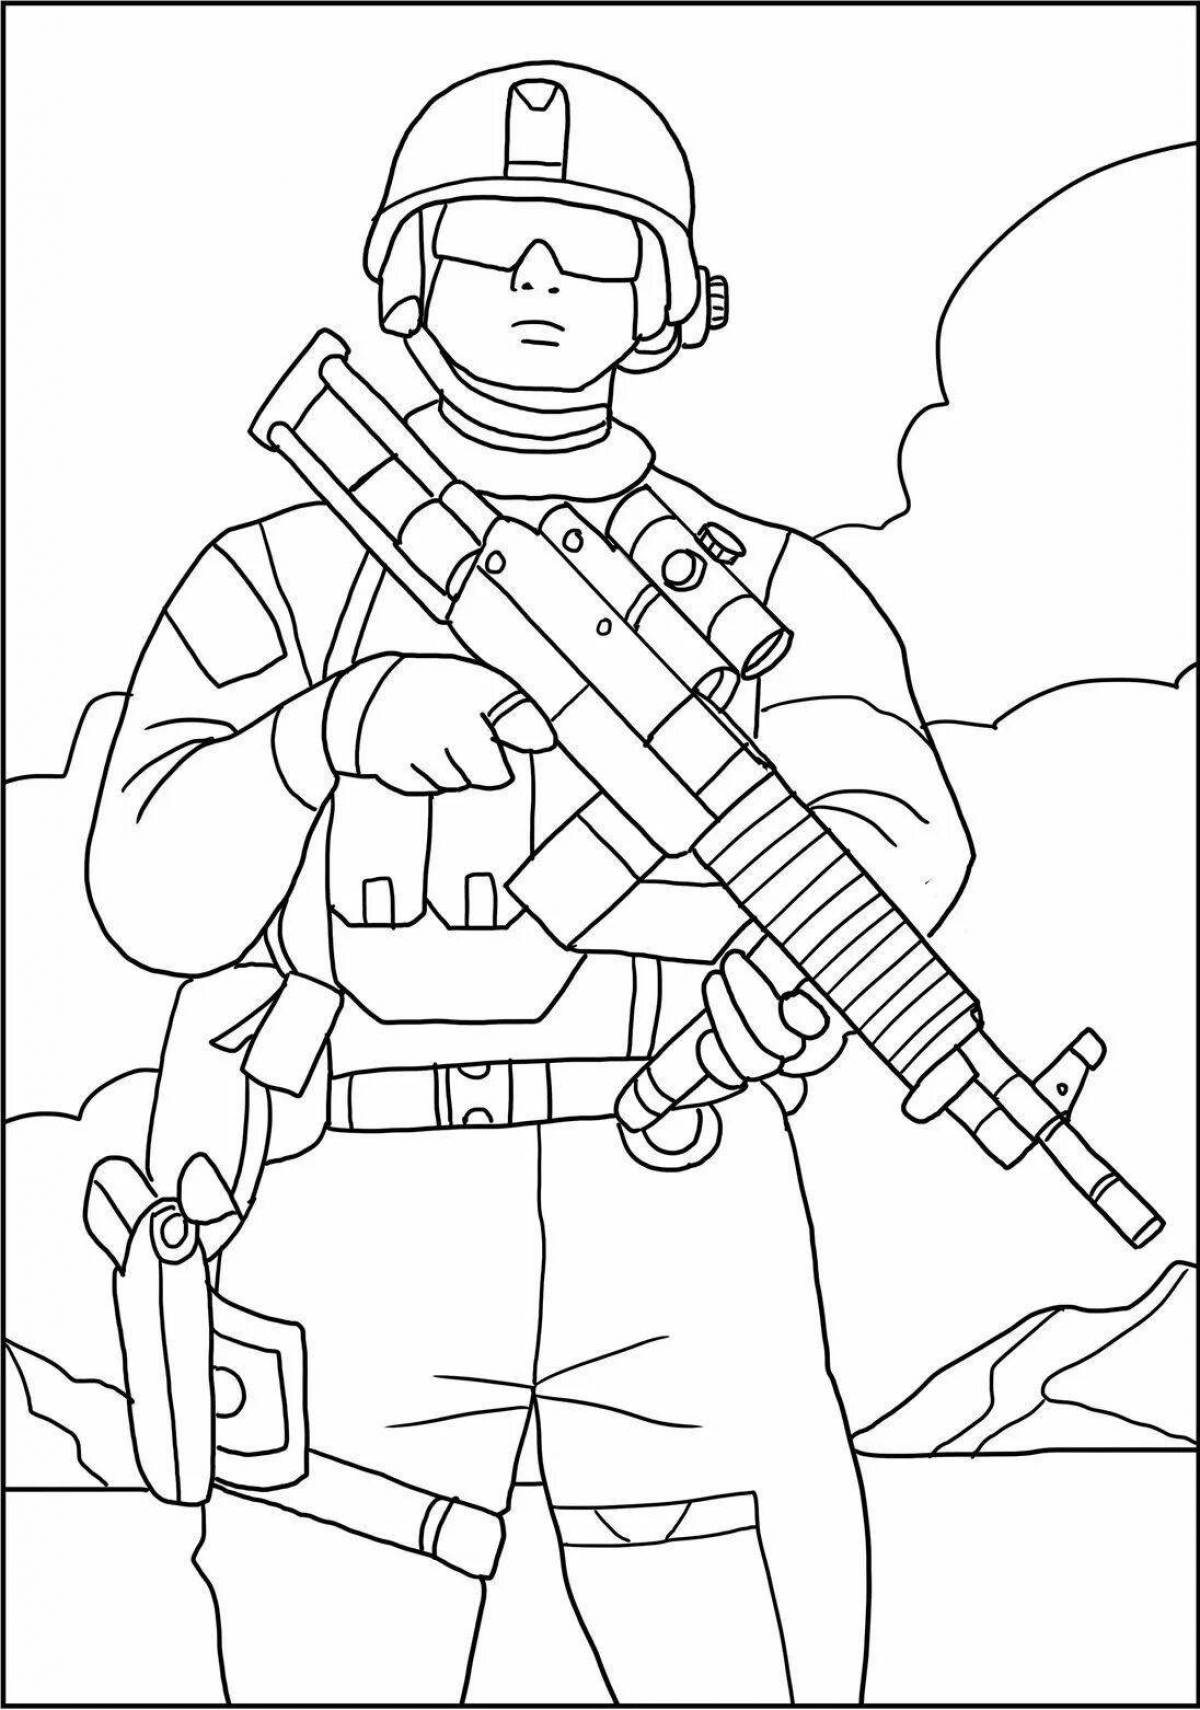 Coloring page daring Russian soldier